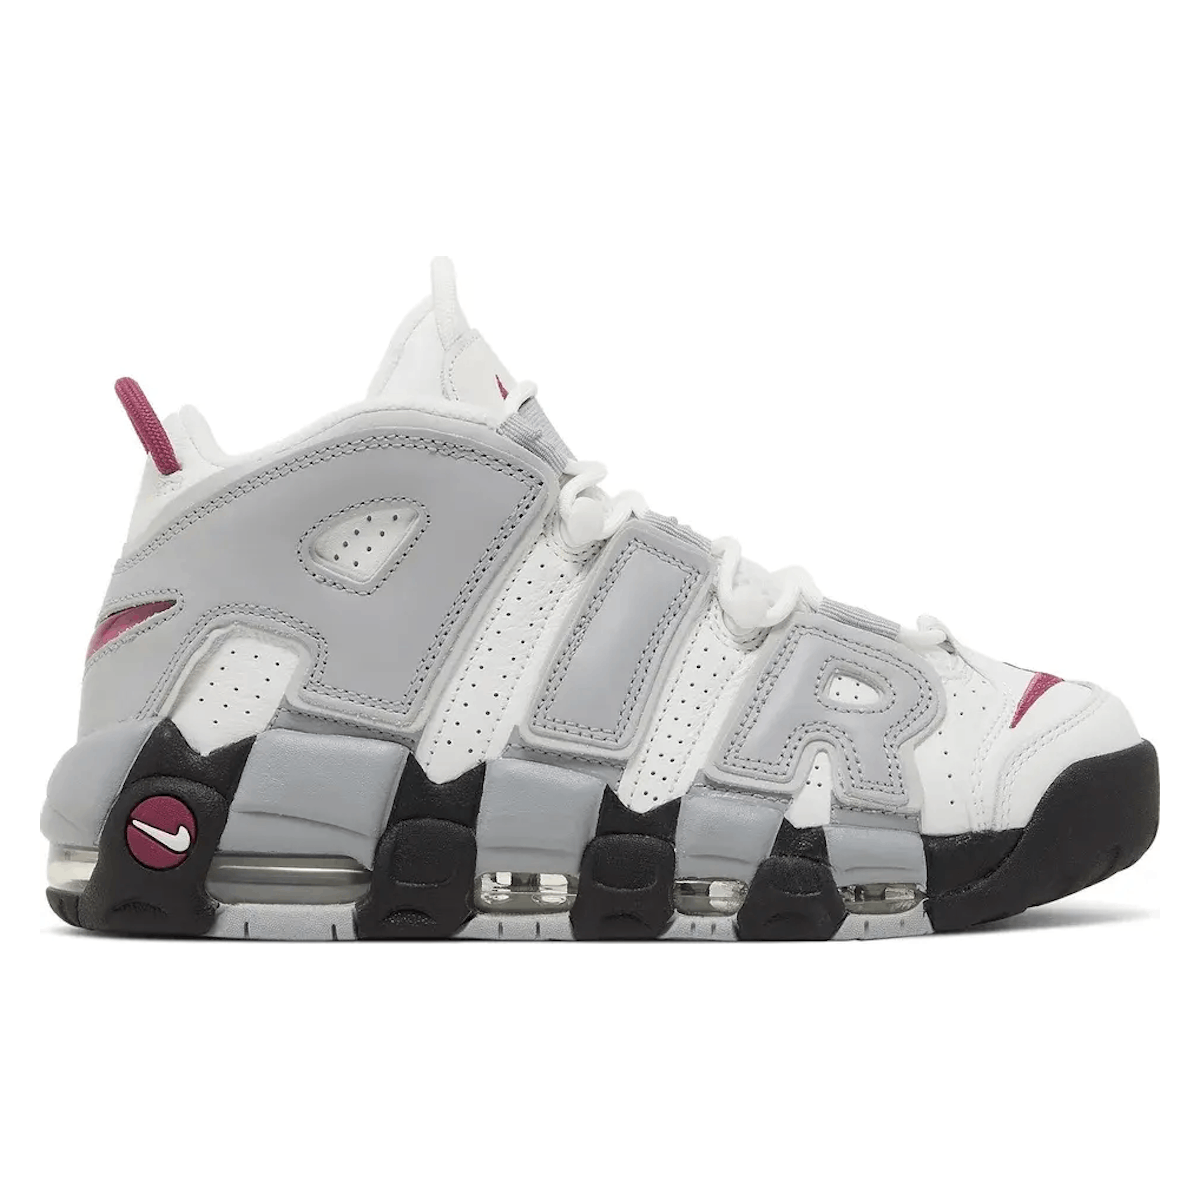 Nike Air More Uptempo Wmns "Rosewood"